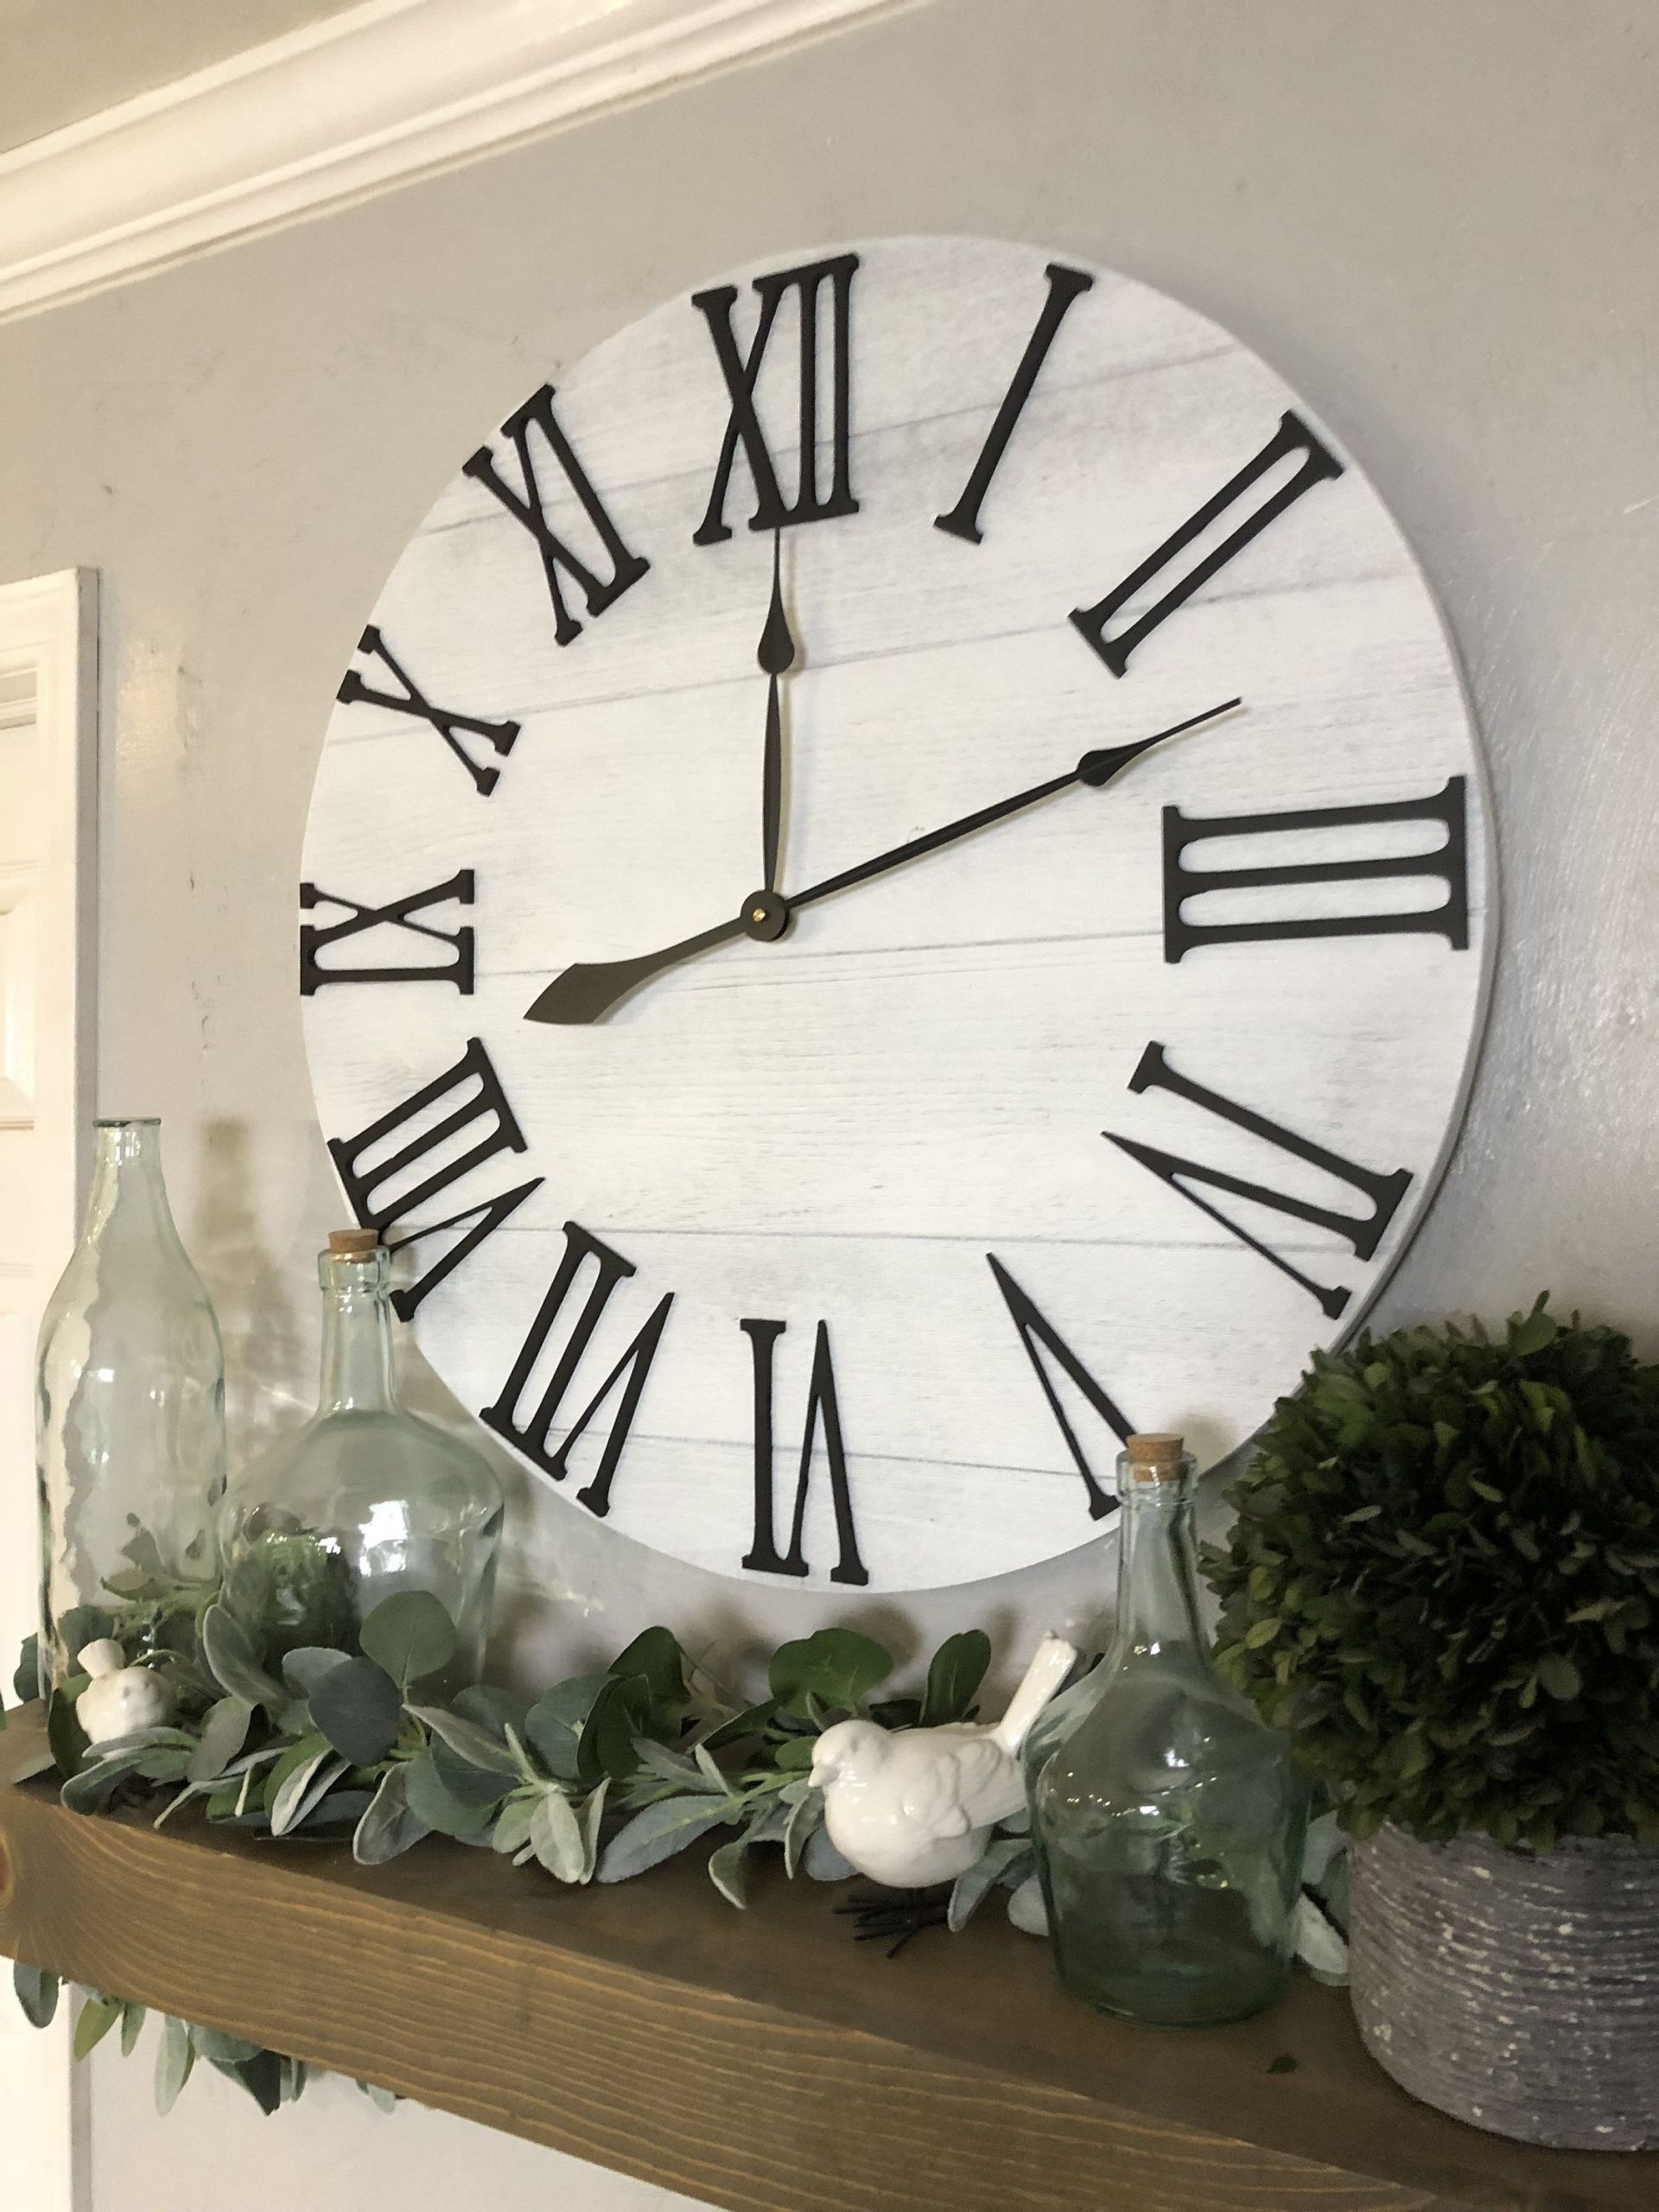 Clocks Over Fireplace Mantel Fresh Big Wall Clocks Image by Plants & Projects On Two Moose